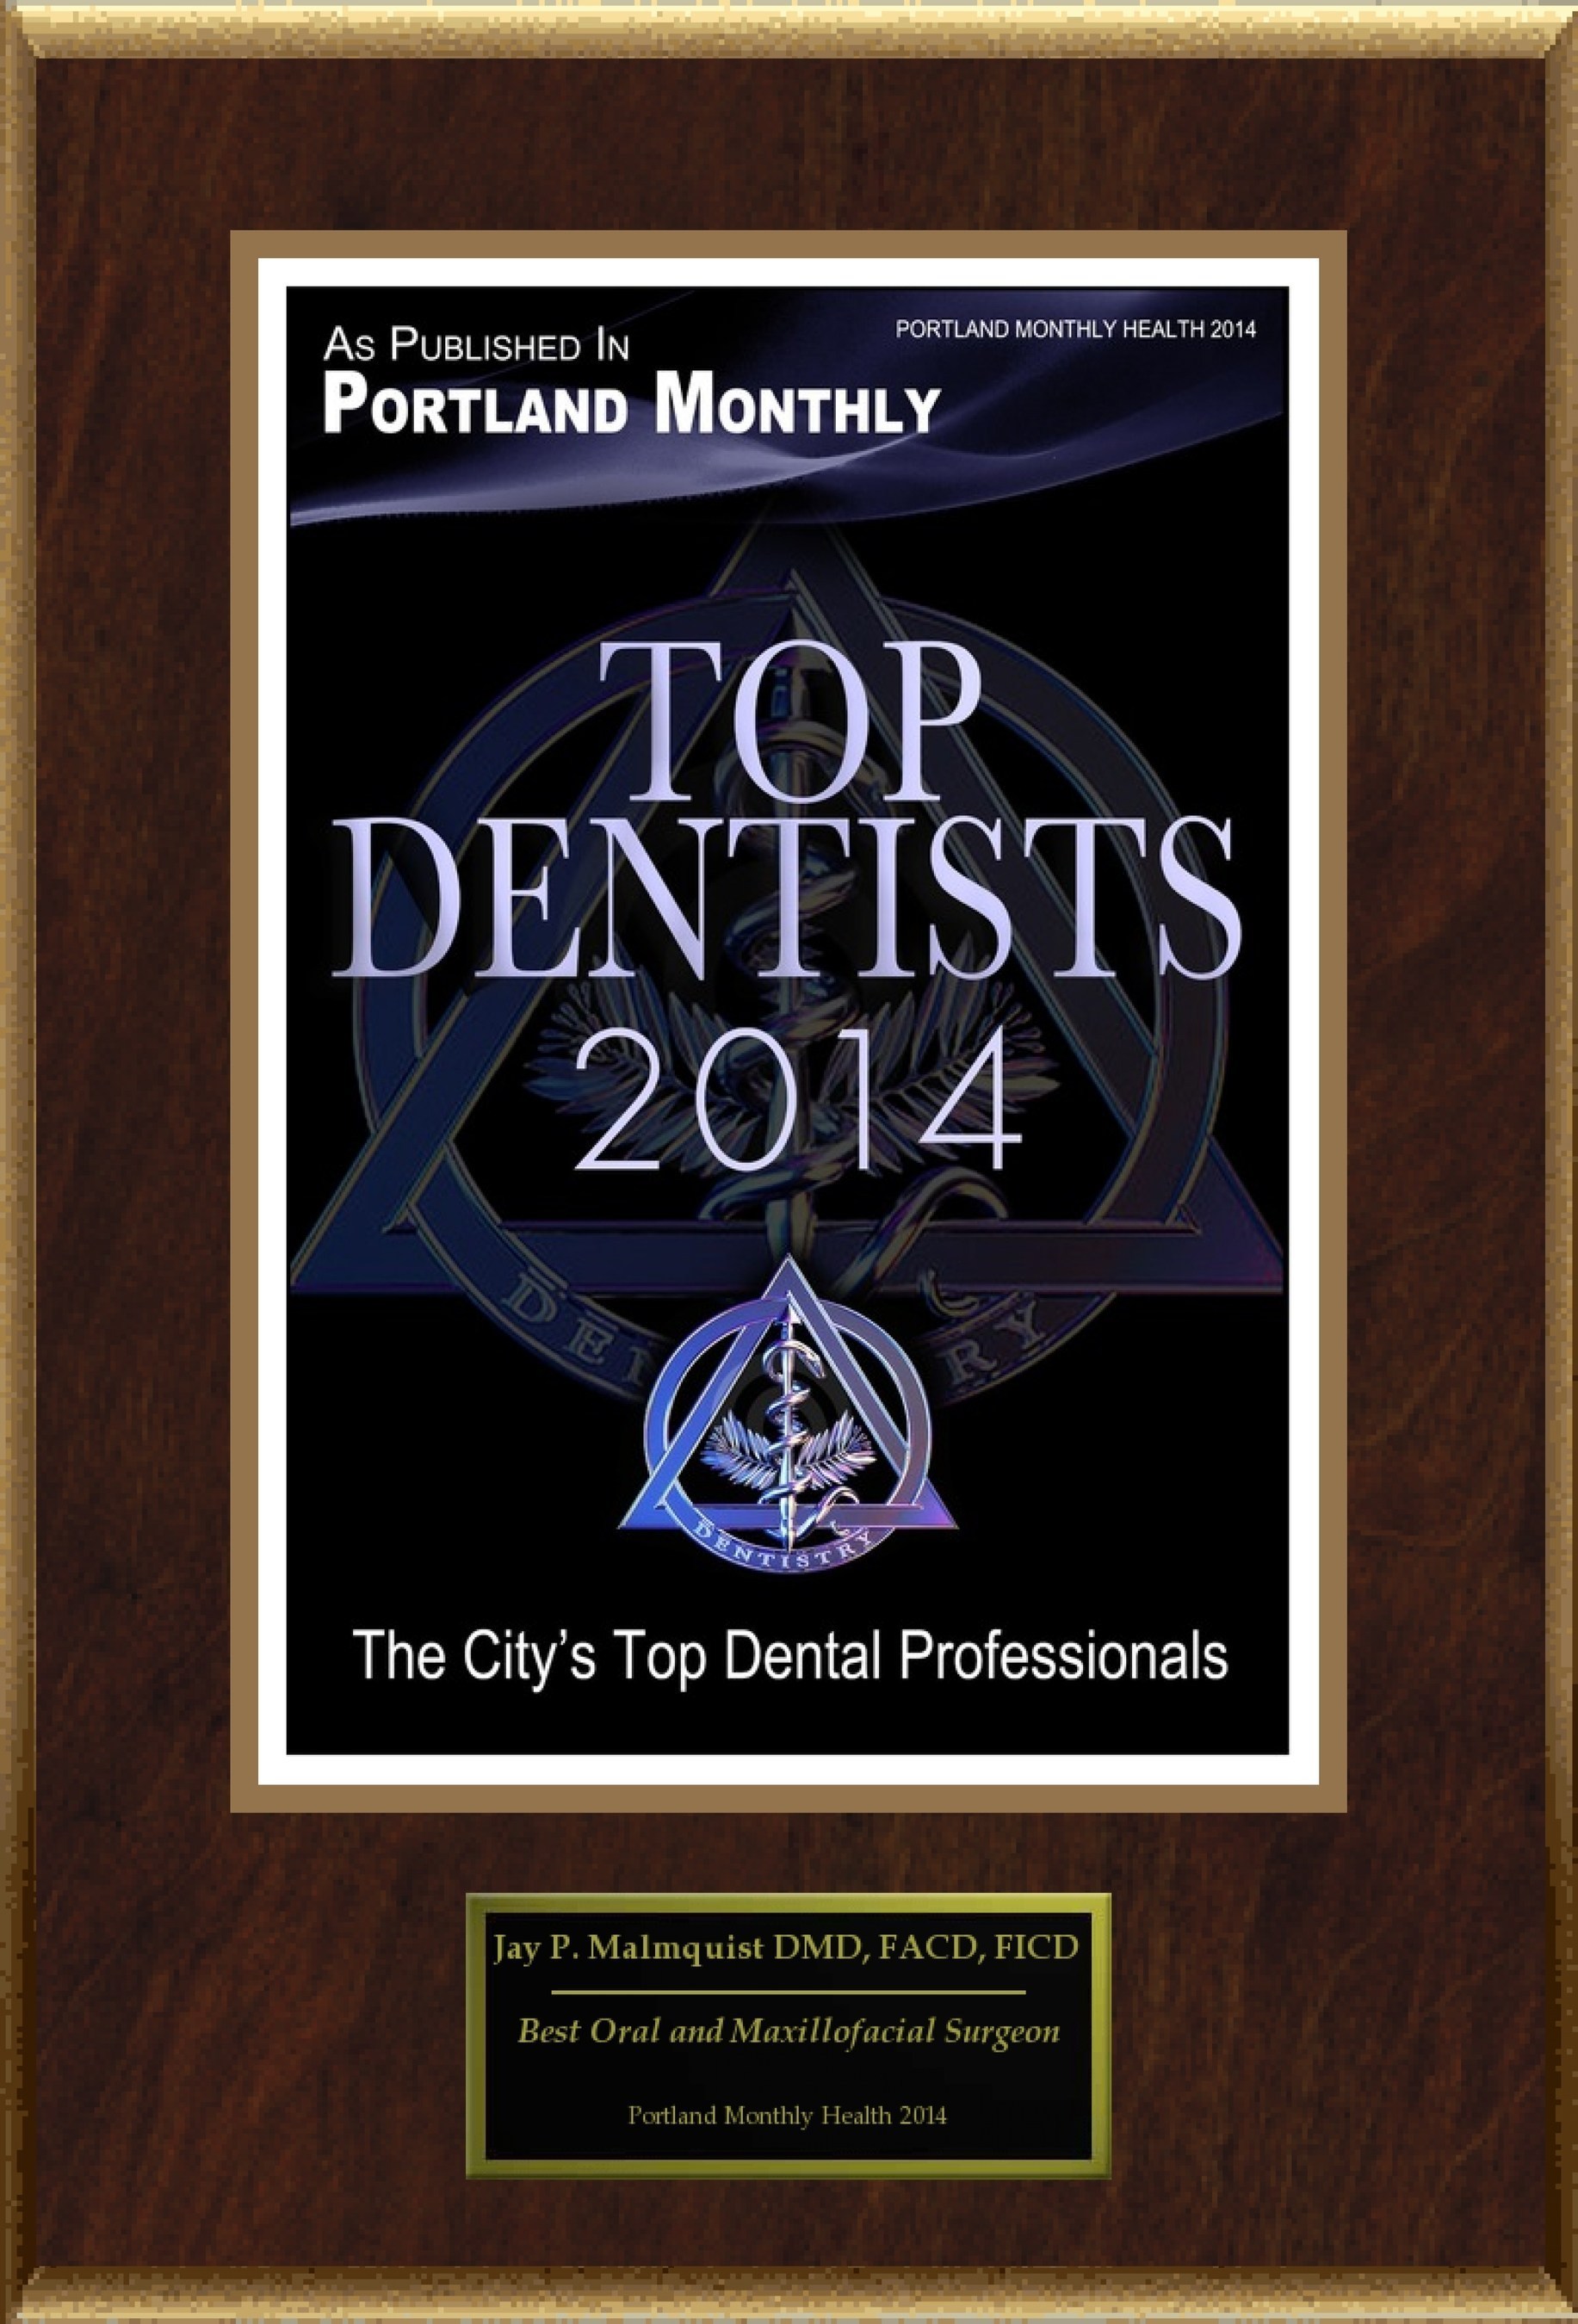 Jay P. Malmquist Selected For "Top Dentists 2014"